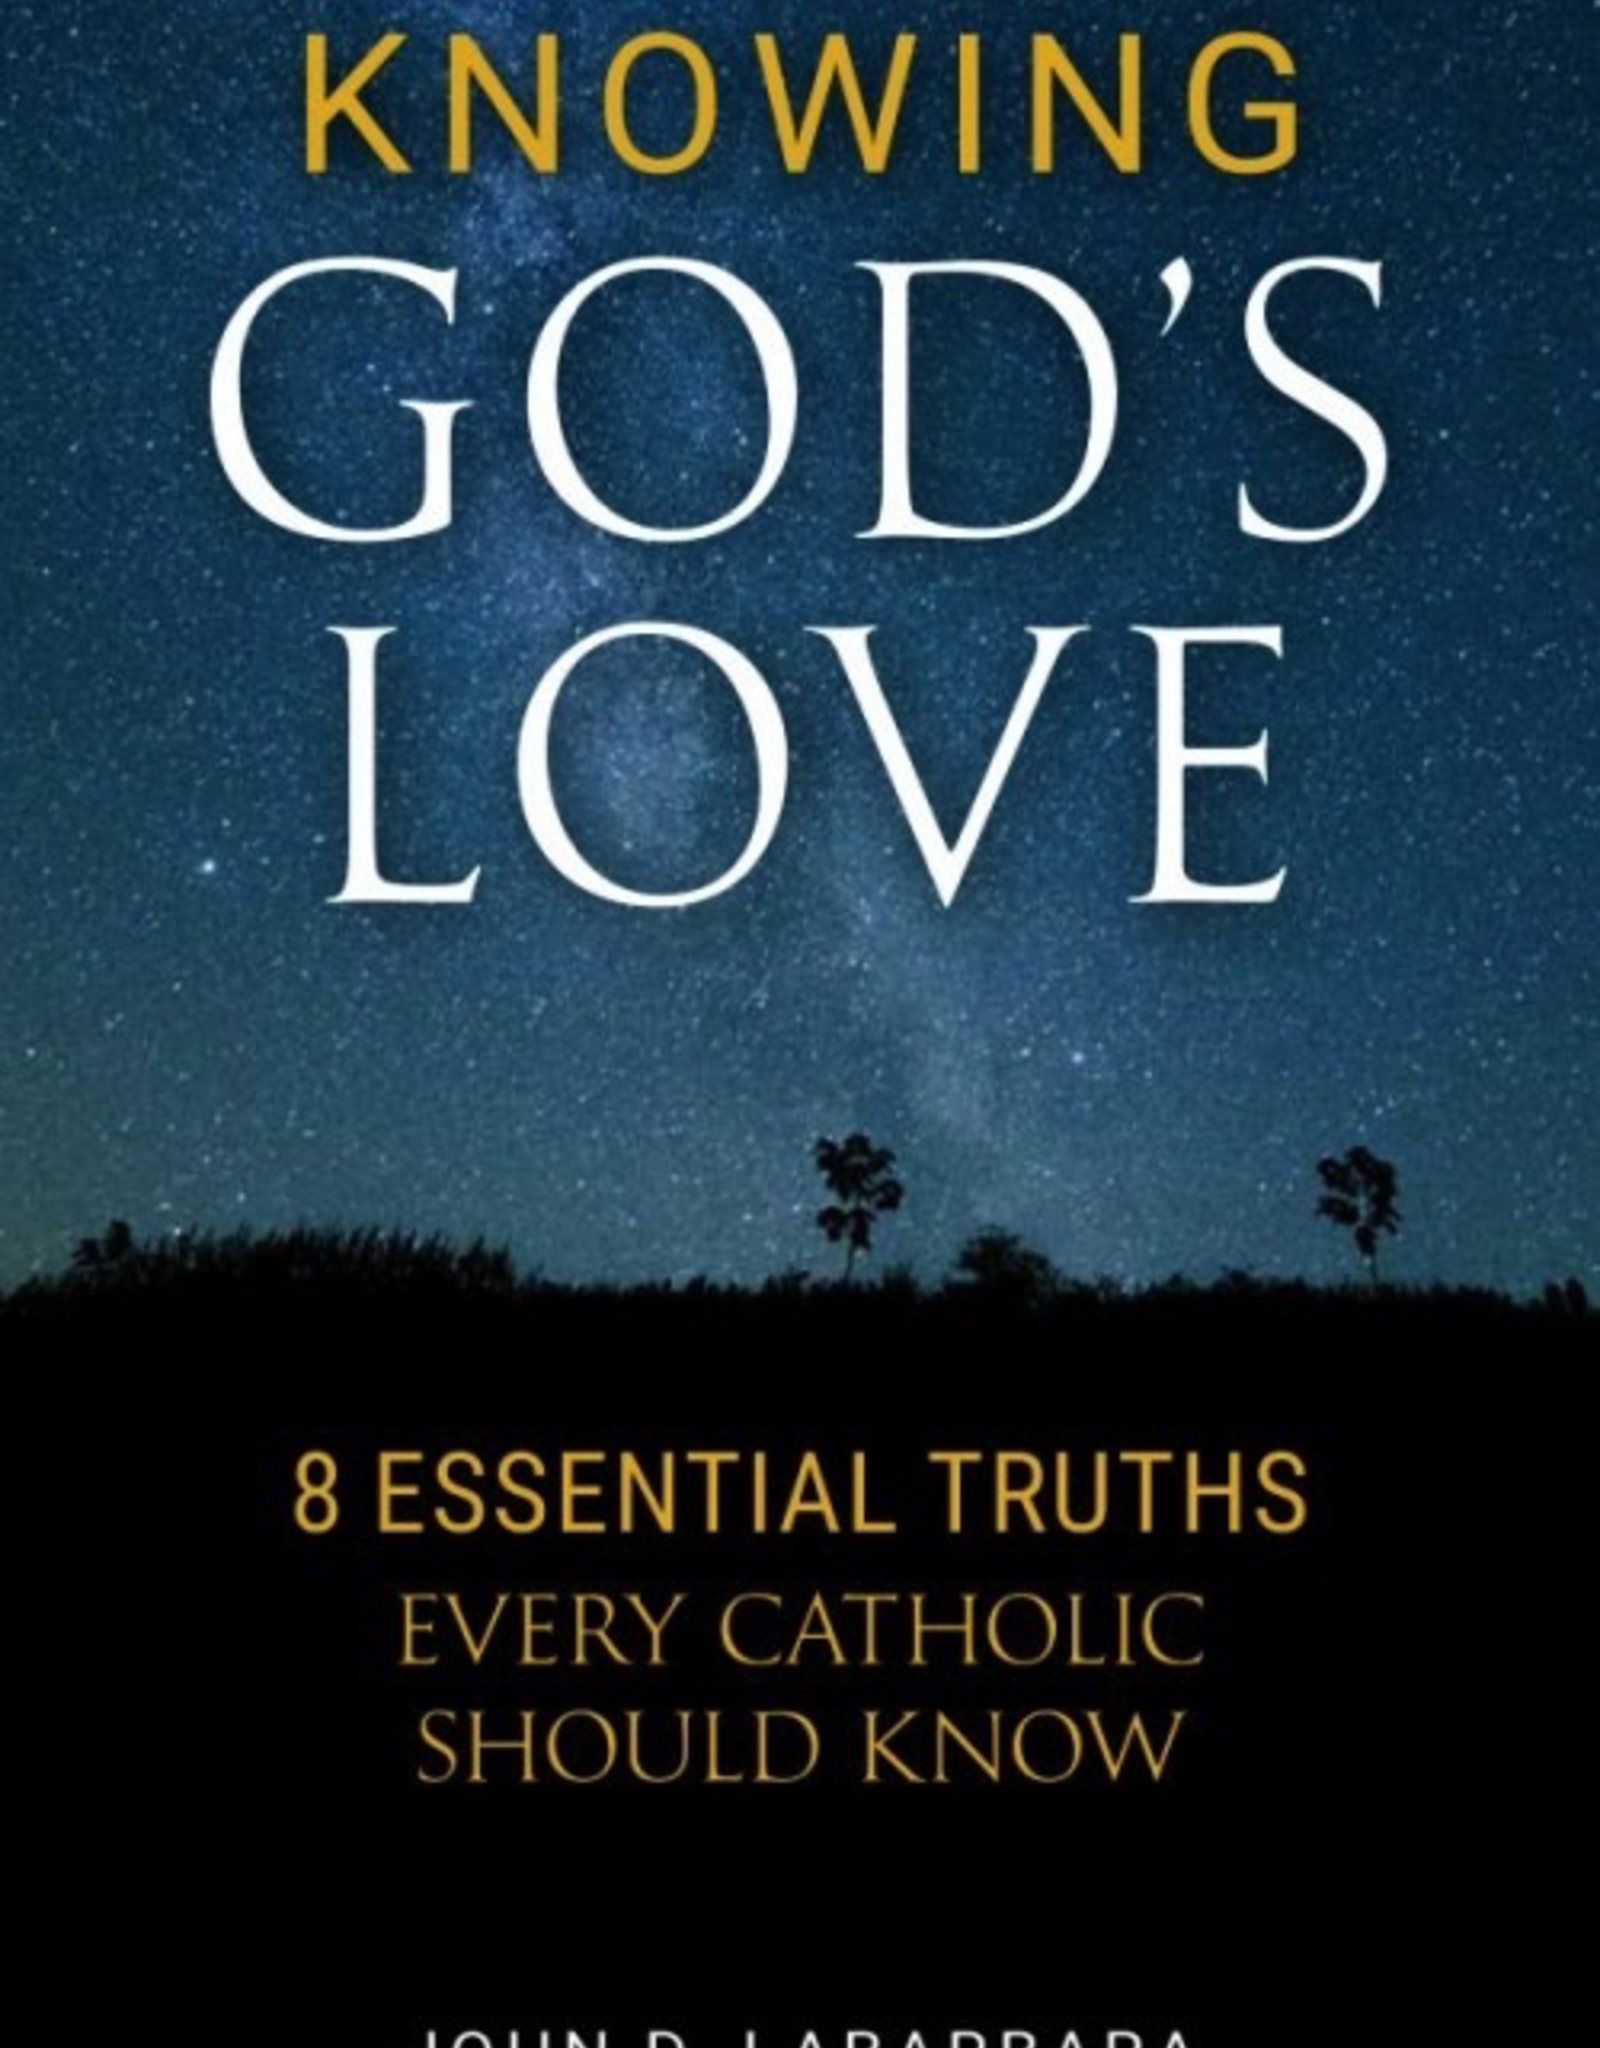 Sophia Institute Knowing God‰Ûªs Love:  8 Essential Truths Every Catholic Should Know, by John D. Labarbara (paperback)